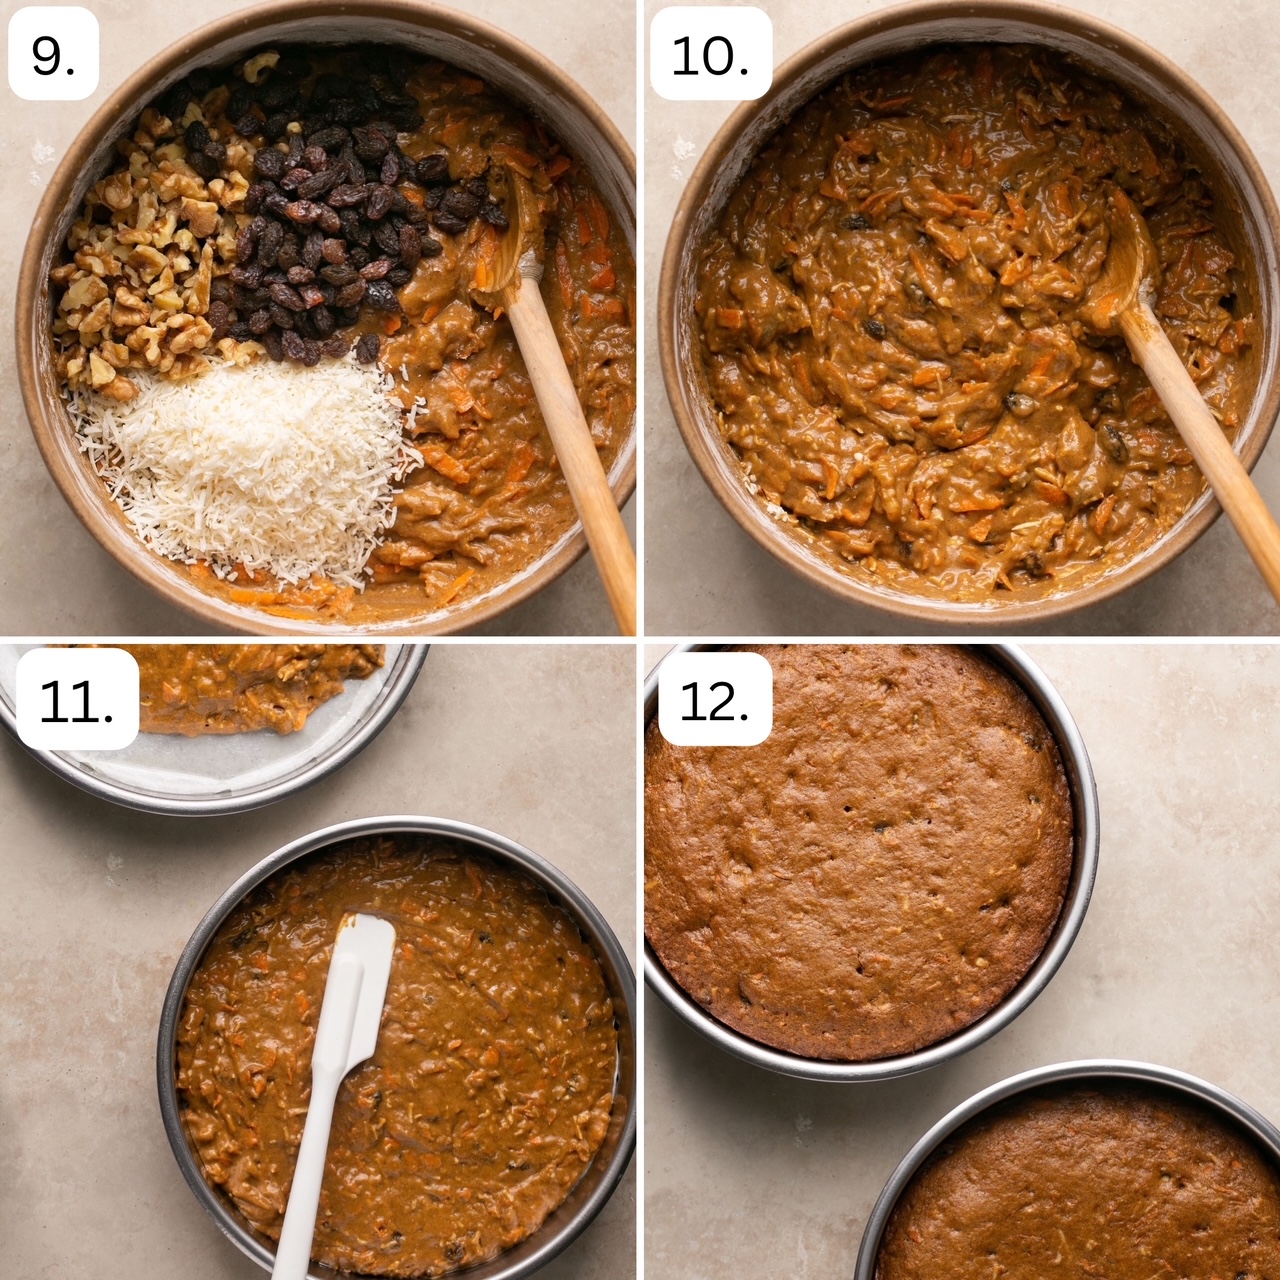 the last 4 steps for making gluten free carrot cake pictured in 4 quadrants